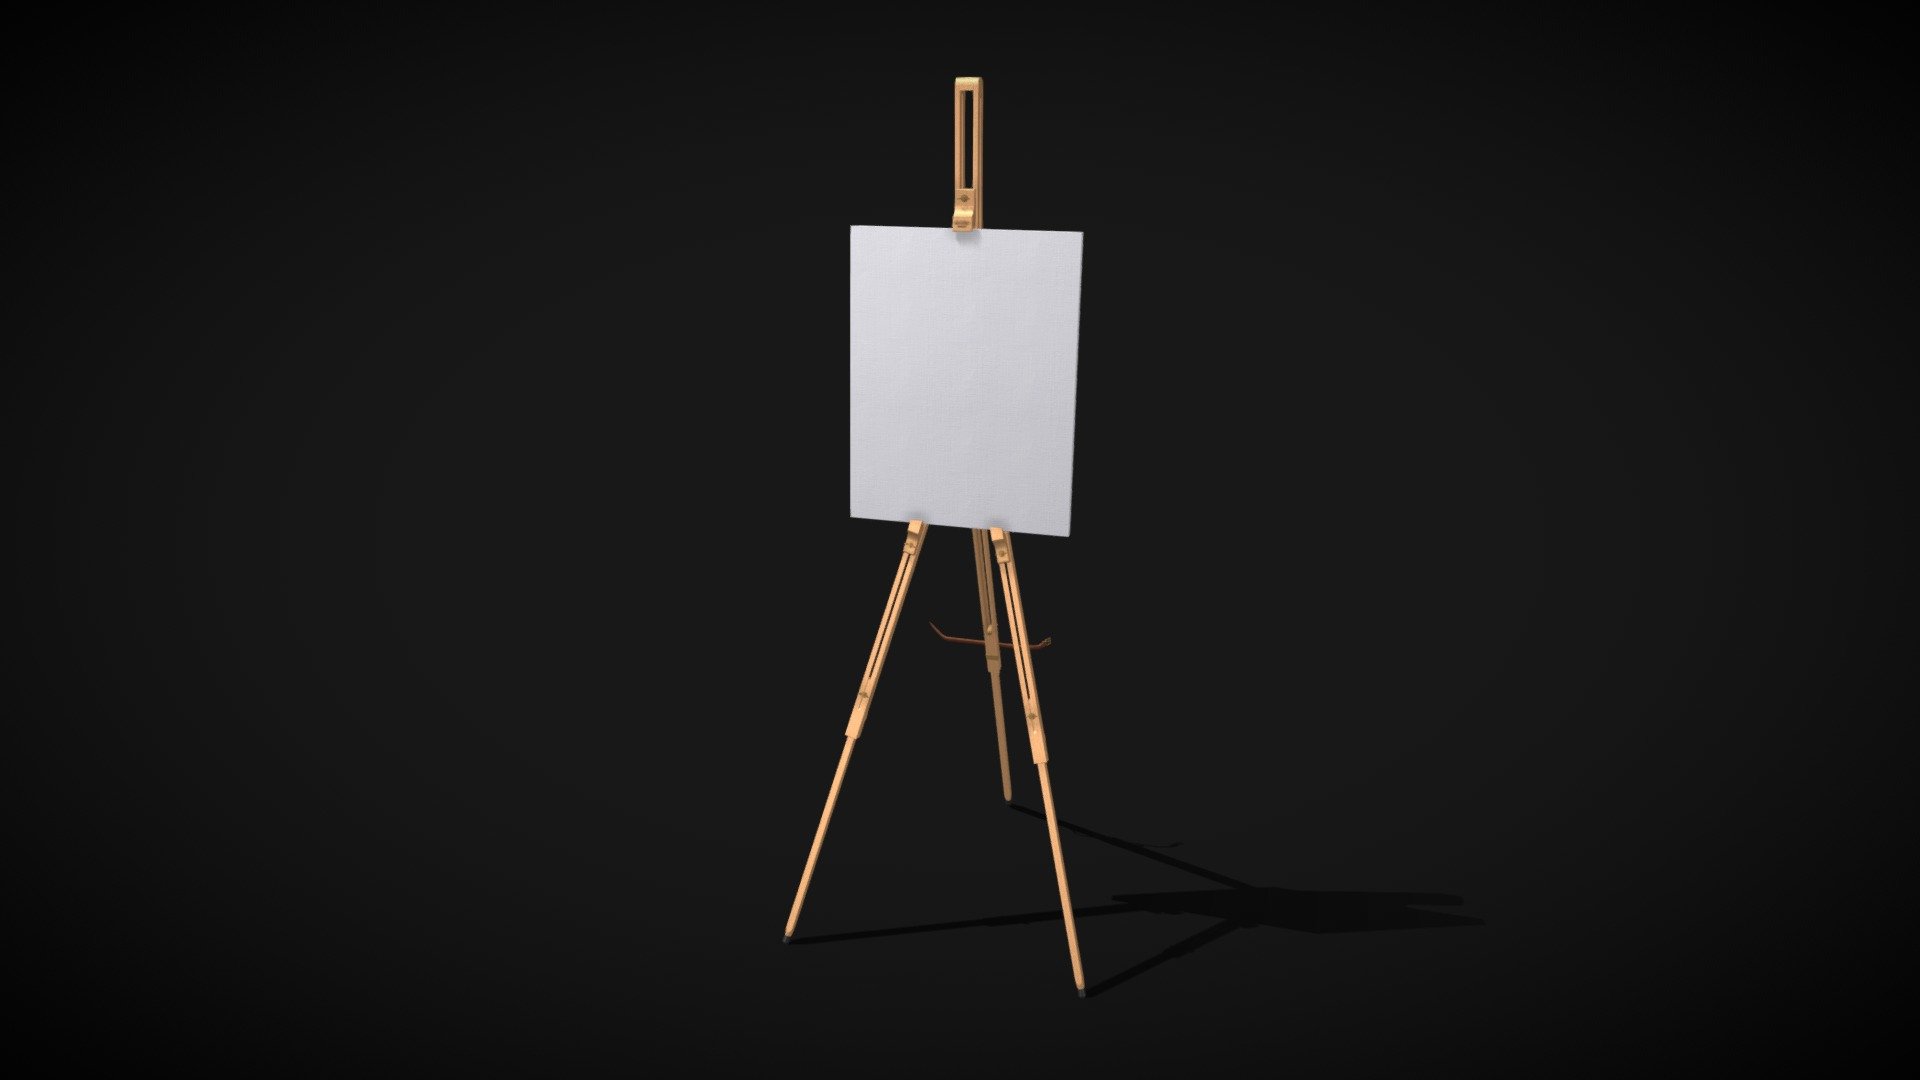 Mabef Universal Folding Easel - FLAX art & design